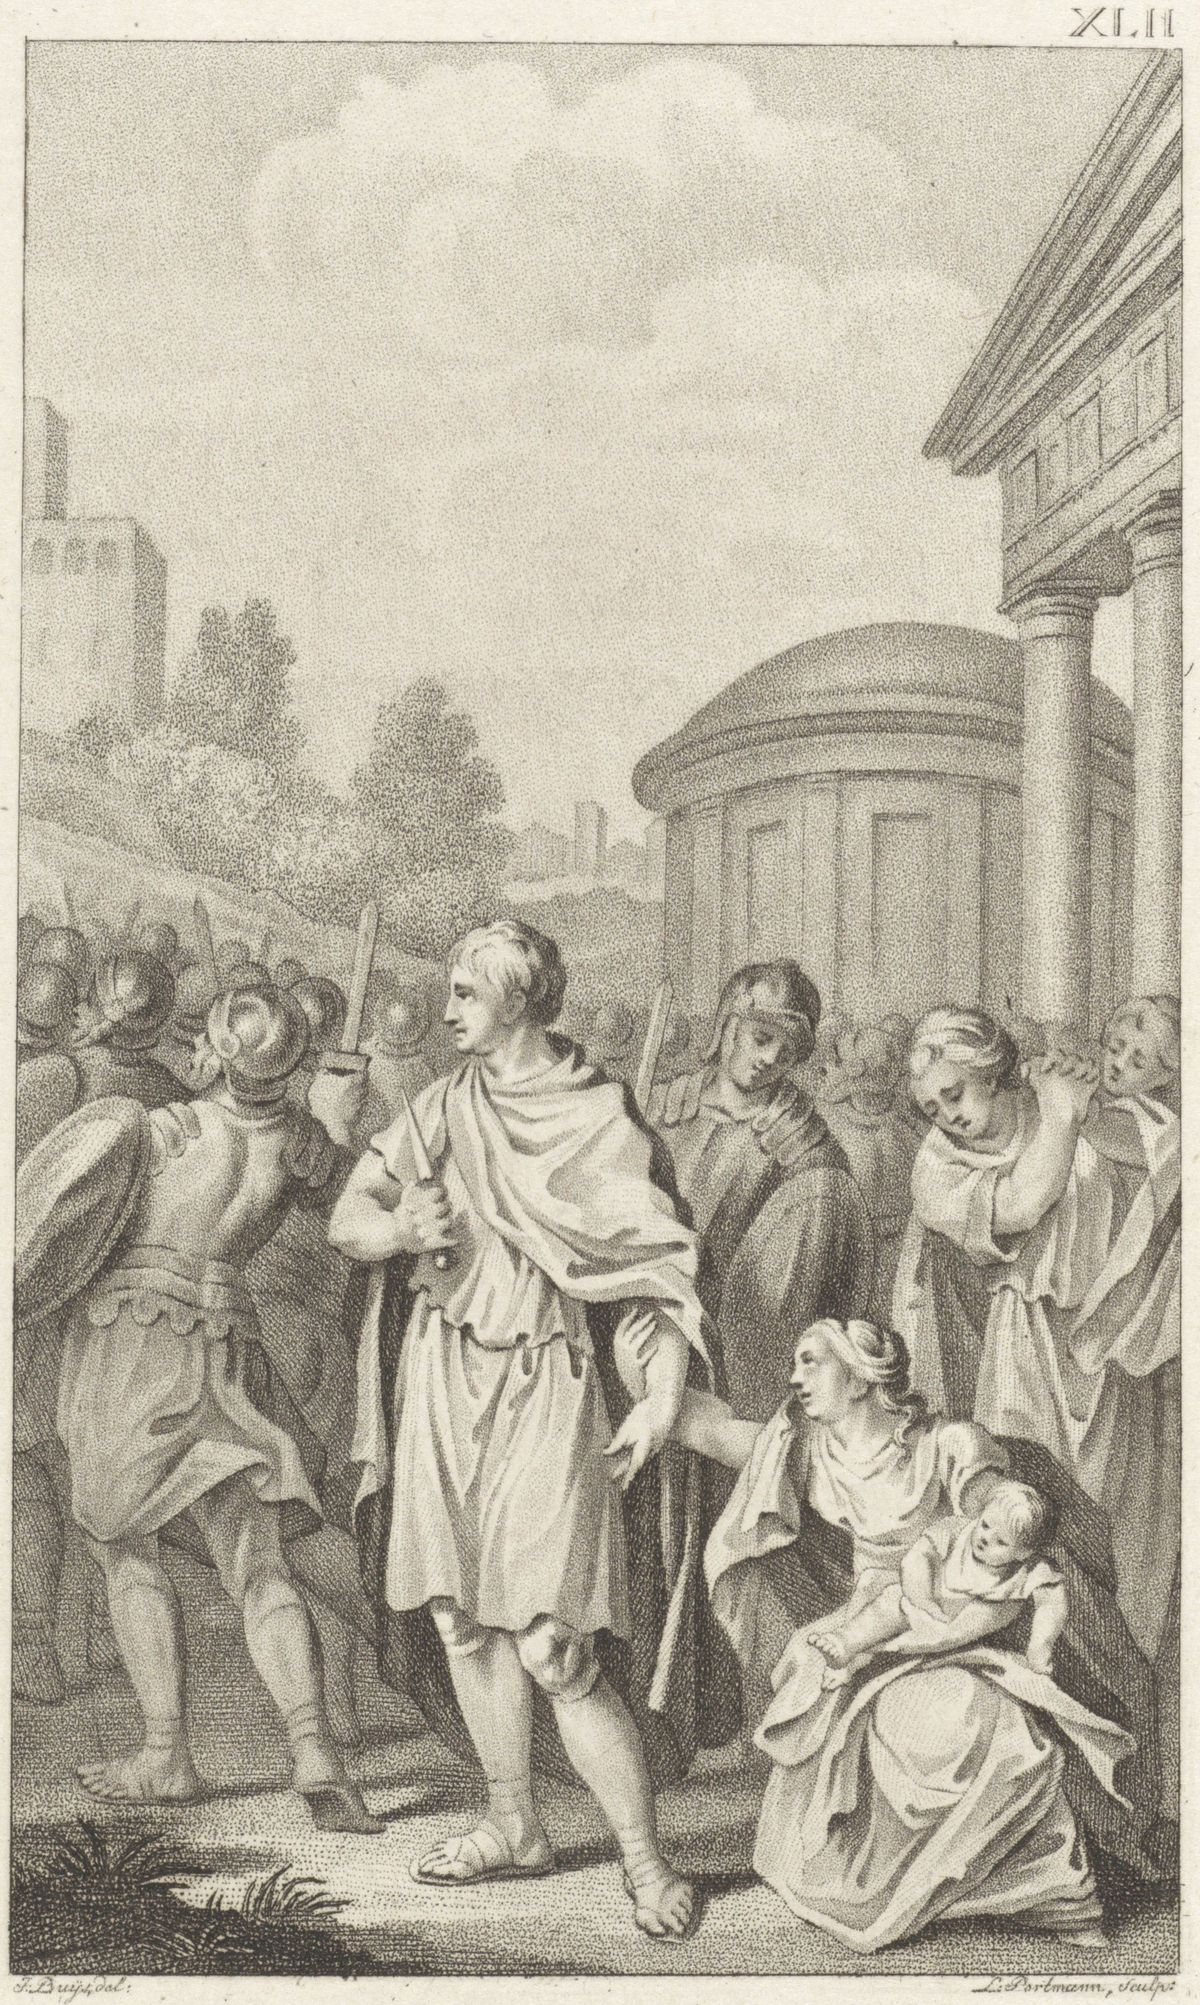 Gracchus walks with the retinue of Flaccus in a mass protest towards the Aventine